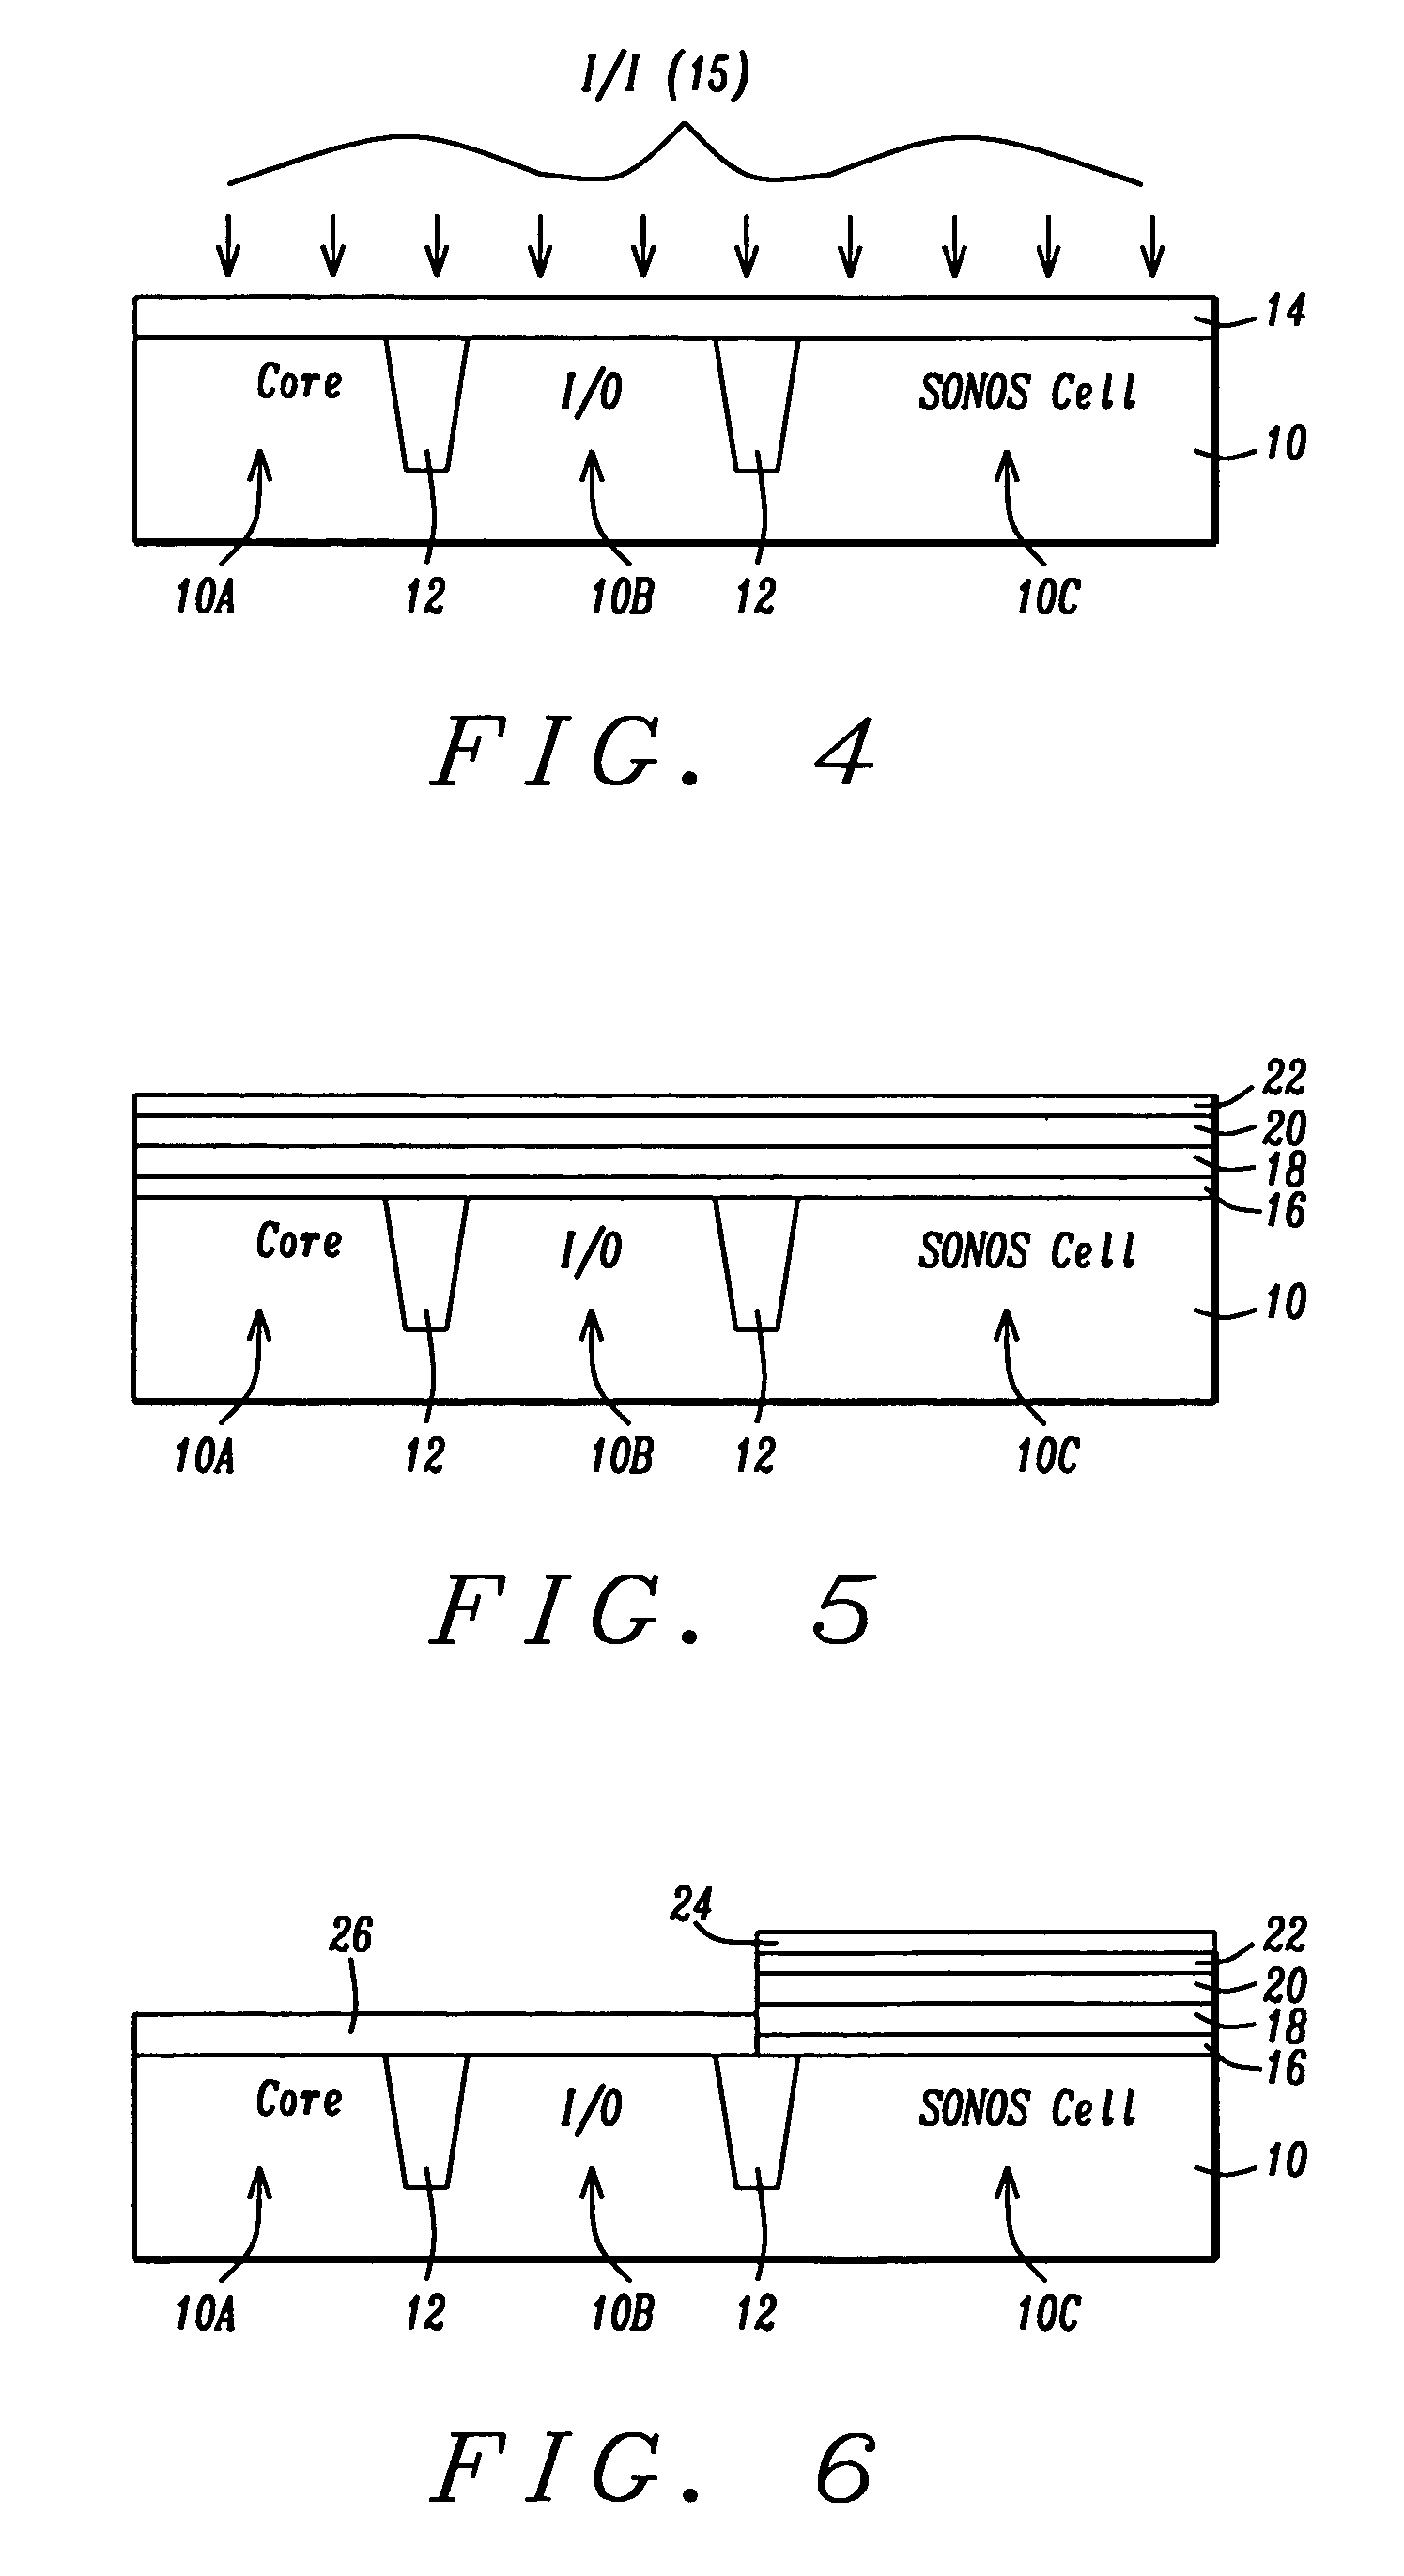 Method for integrating a SONOS gate oxide transistor into a logic/analog integrated circuit having several gate oxide thicknesses